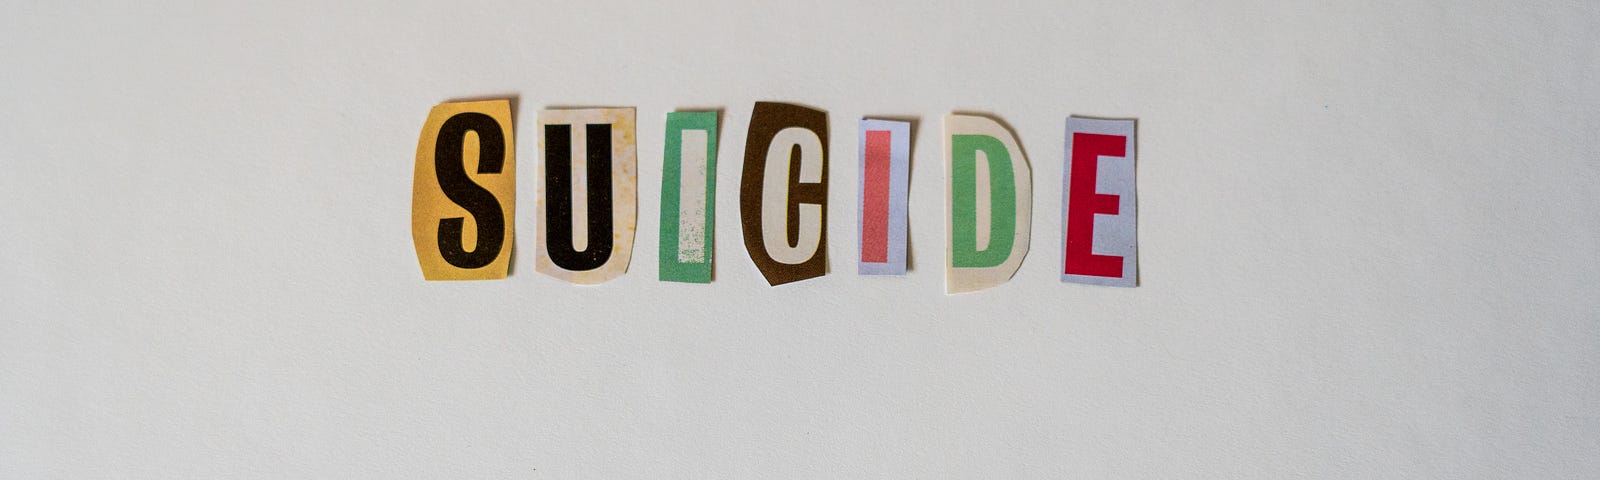 Cutting glued on a white surface to form the word SUICIDE